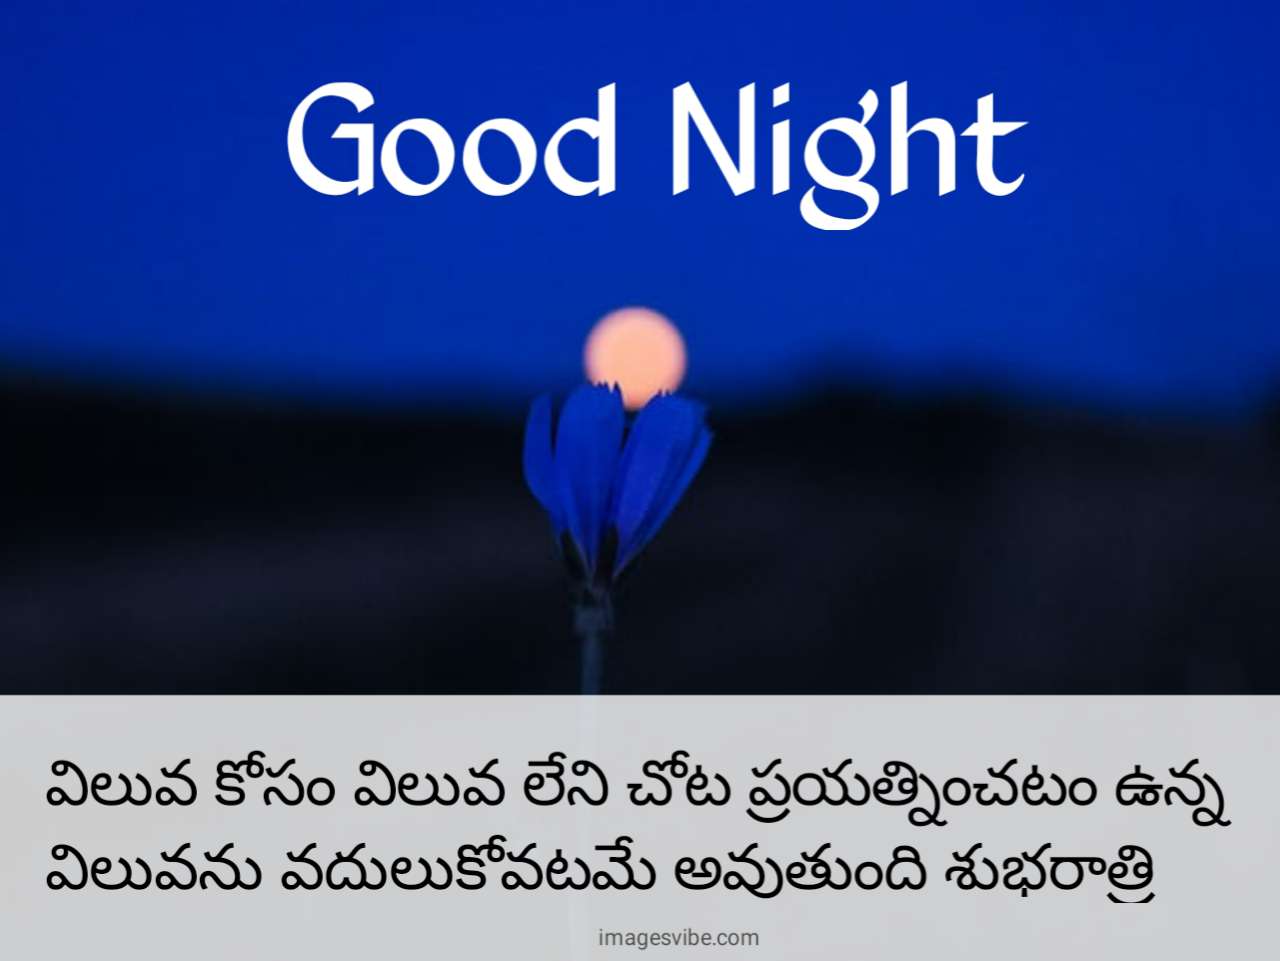 Beautiful Good Night Telugu Images & Quotes in 2023 - Images Vibe